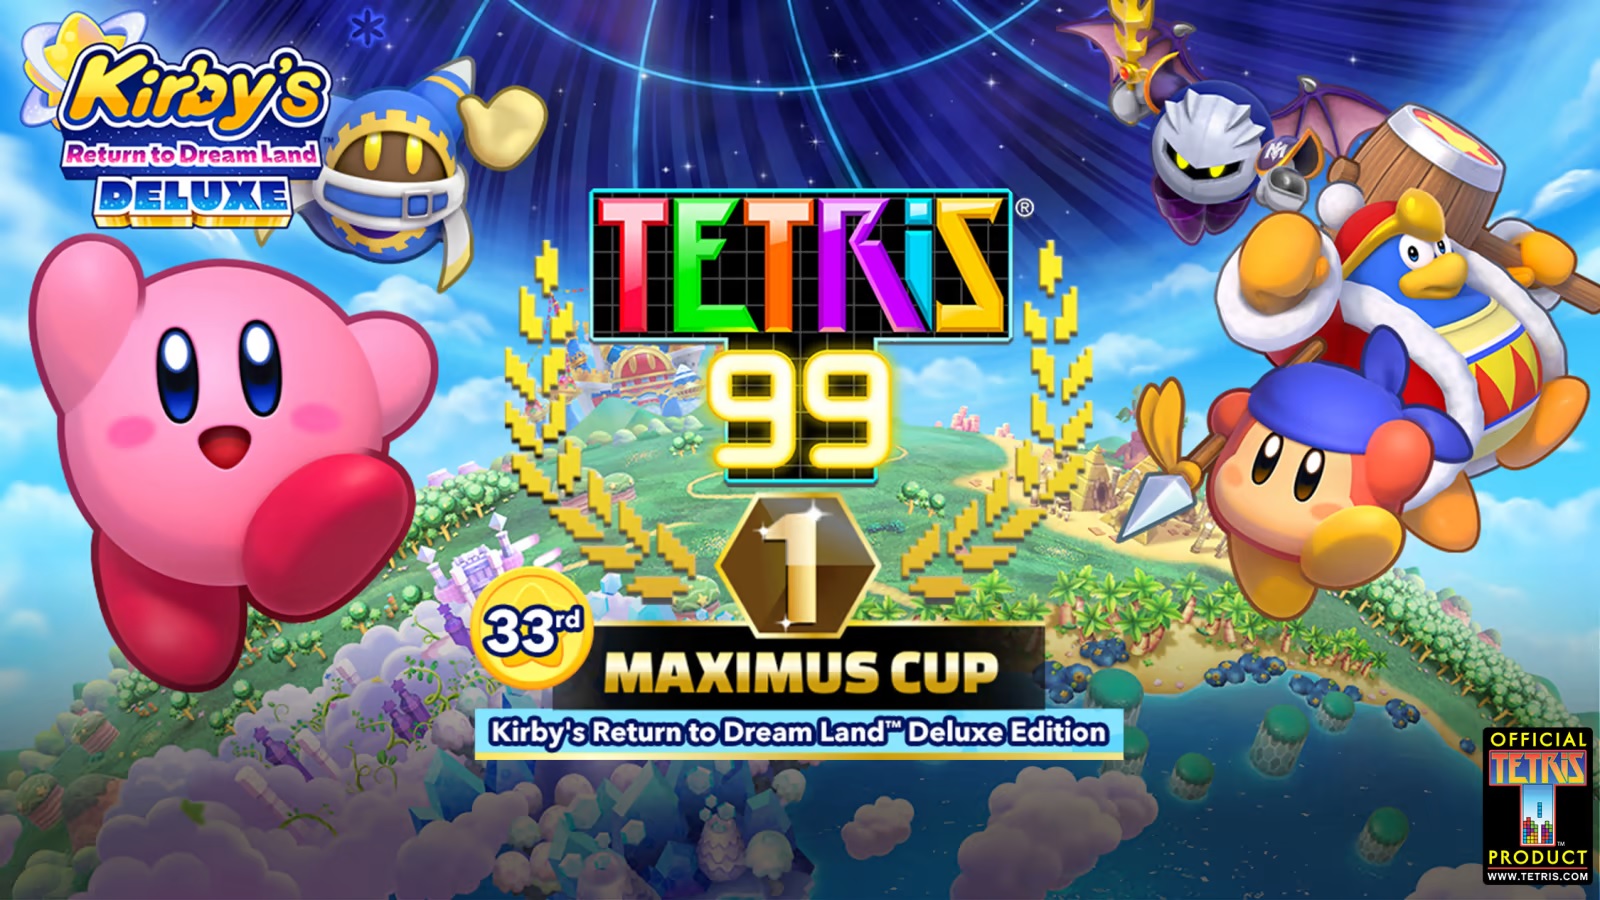 Tetris 99 33rd Maximus Cup 'Kirby's Return to Dream Land Deluxe' Edition  Announced